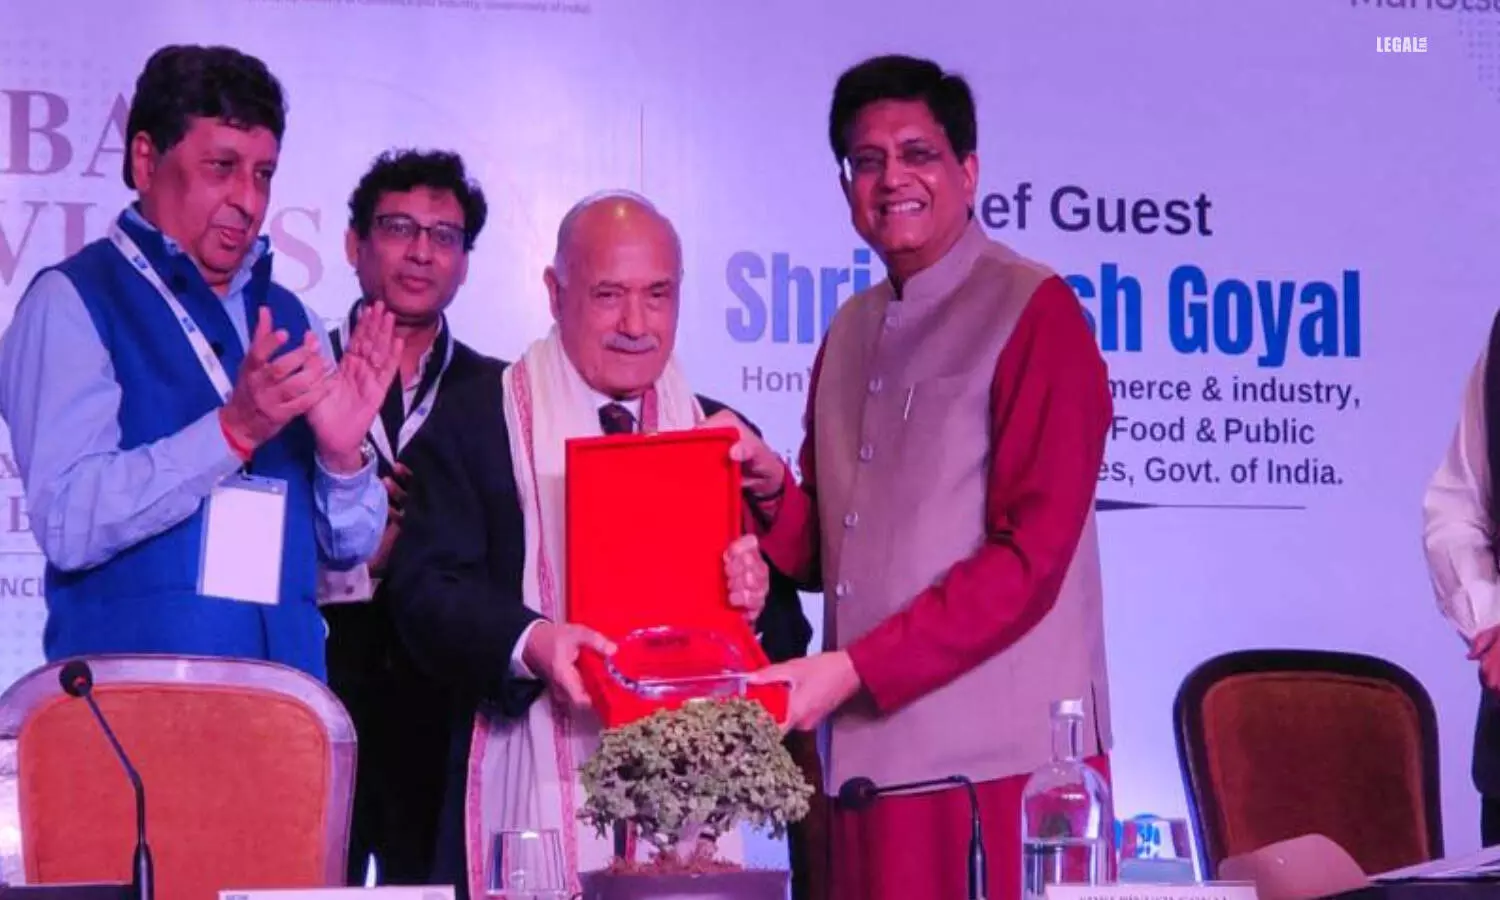 Dr Lalit Bhasin honoured for services as Founder-Chairman of the SEPC